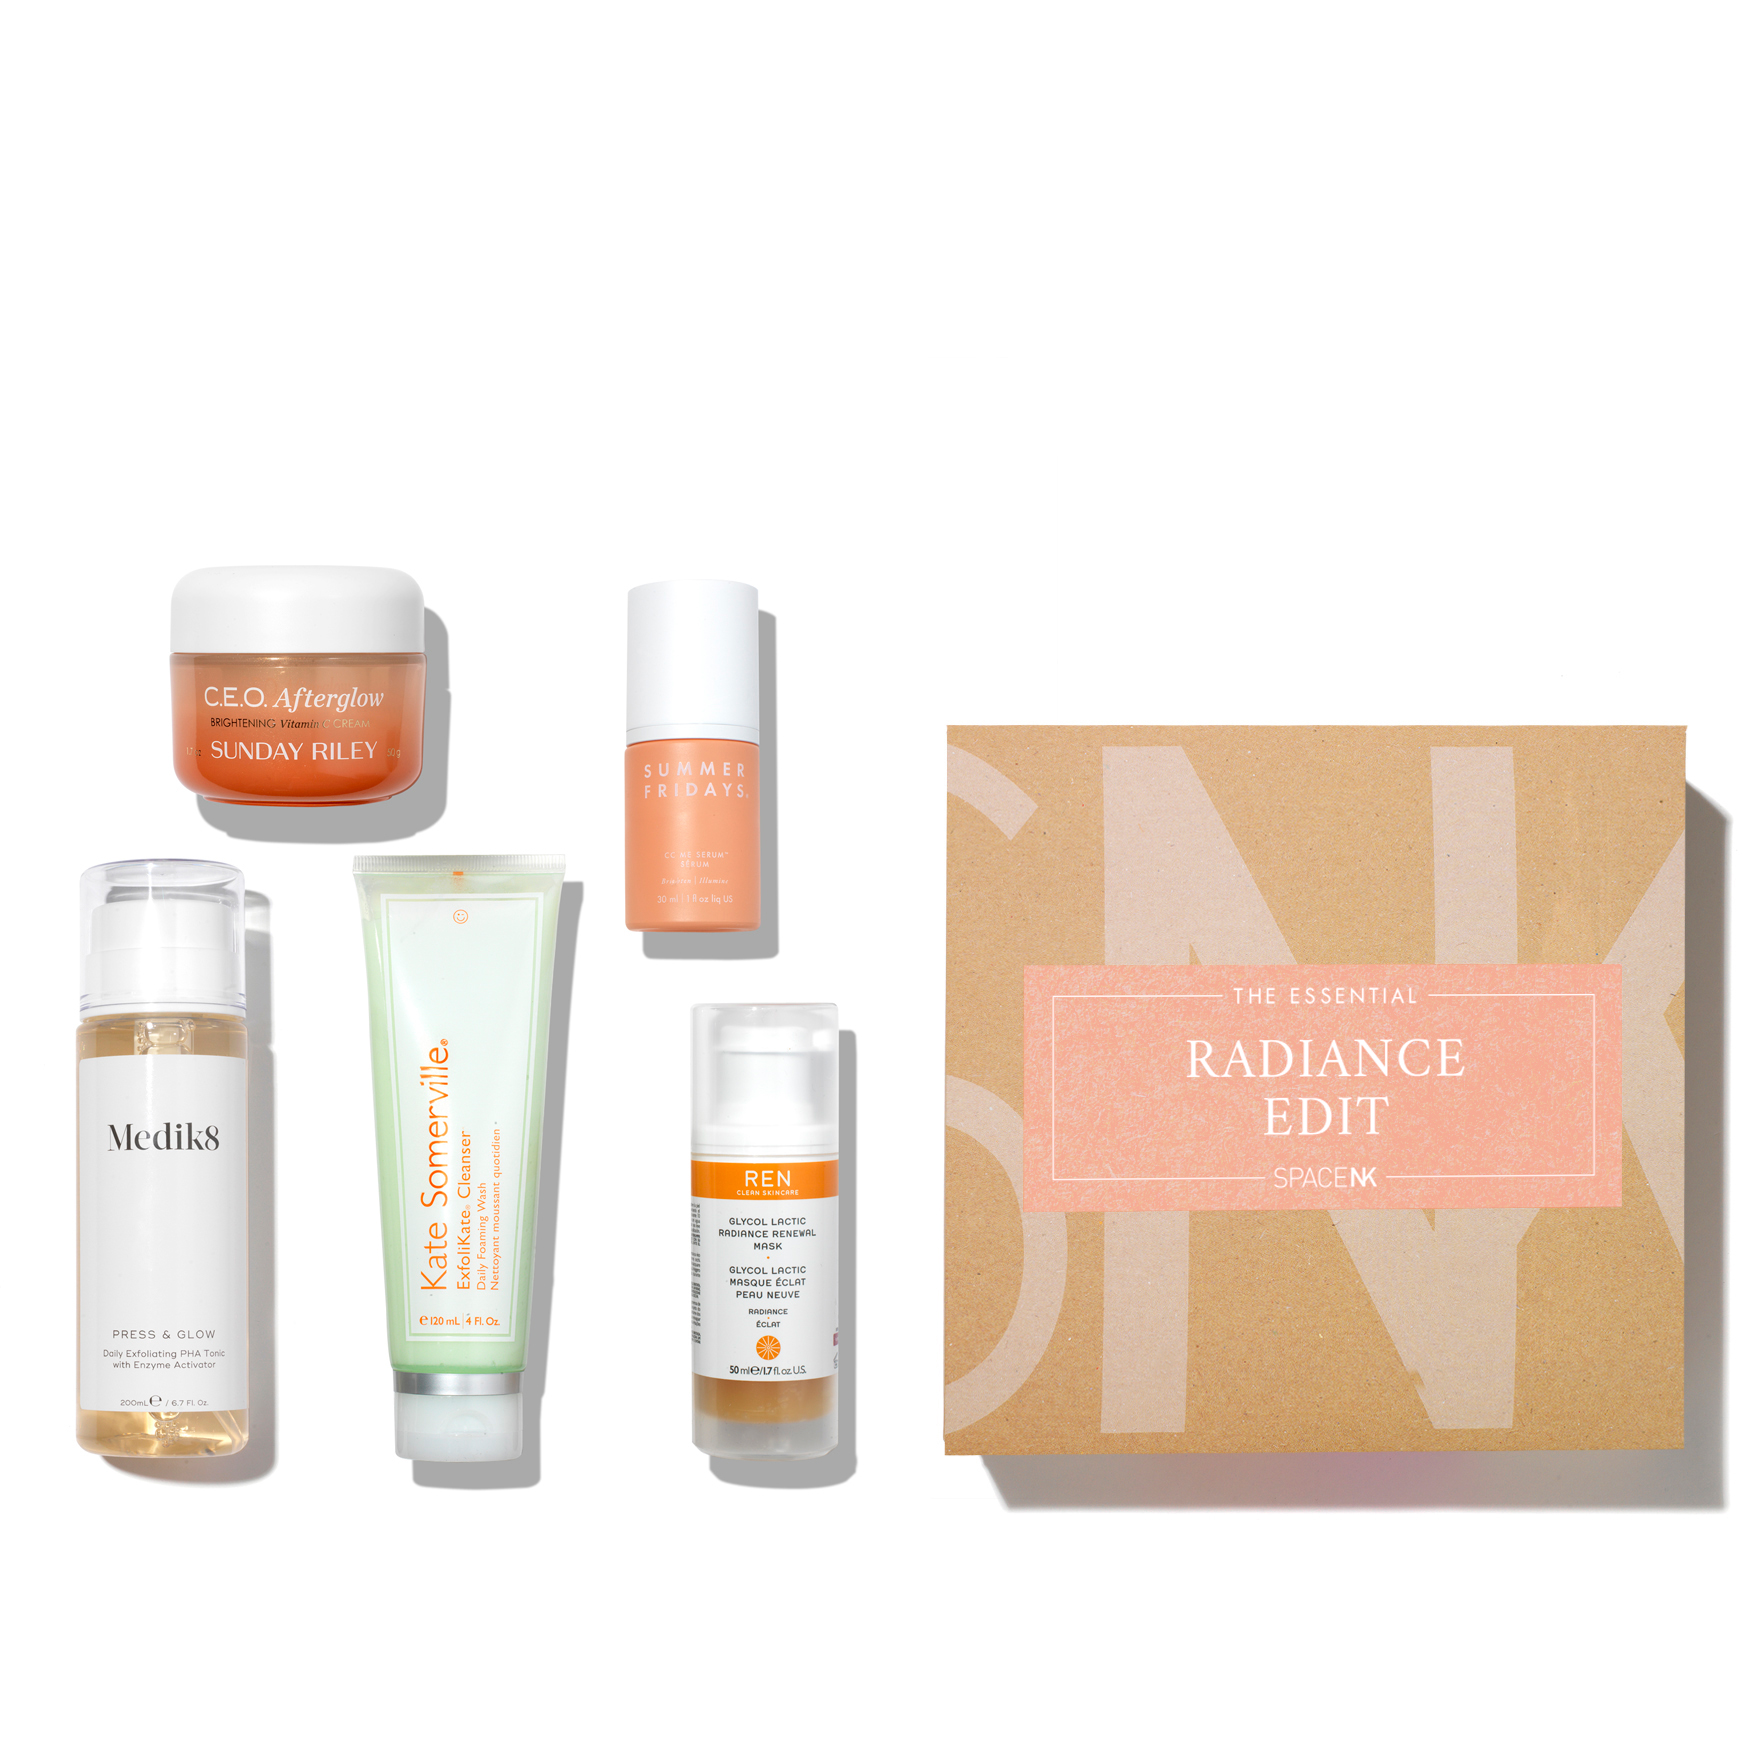 Space NK The Essential Radiance Routine Edit | Space NK